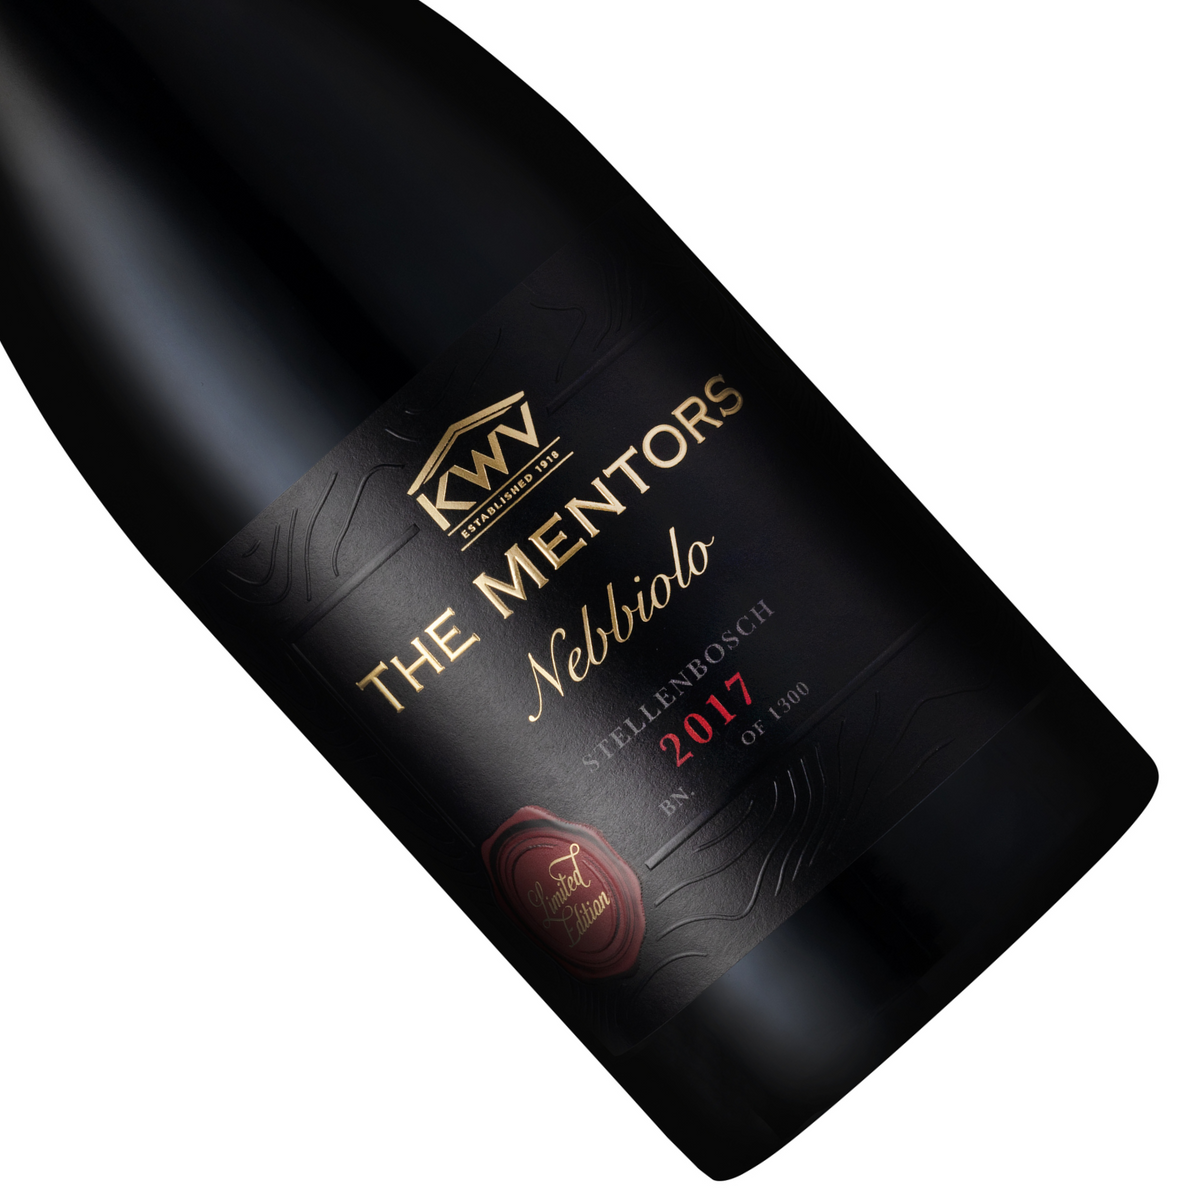 KWV The Mentors Nebbiolo 2017 (Limited Edition)